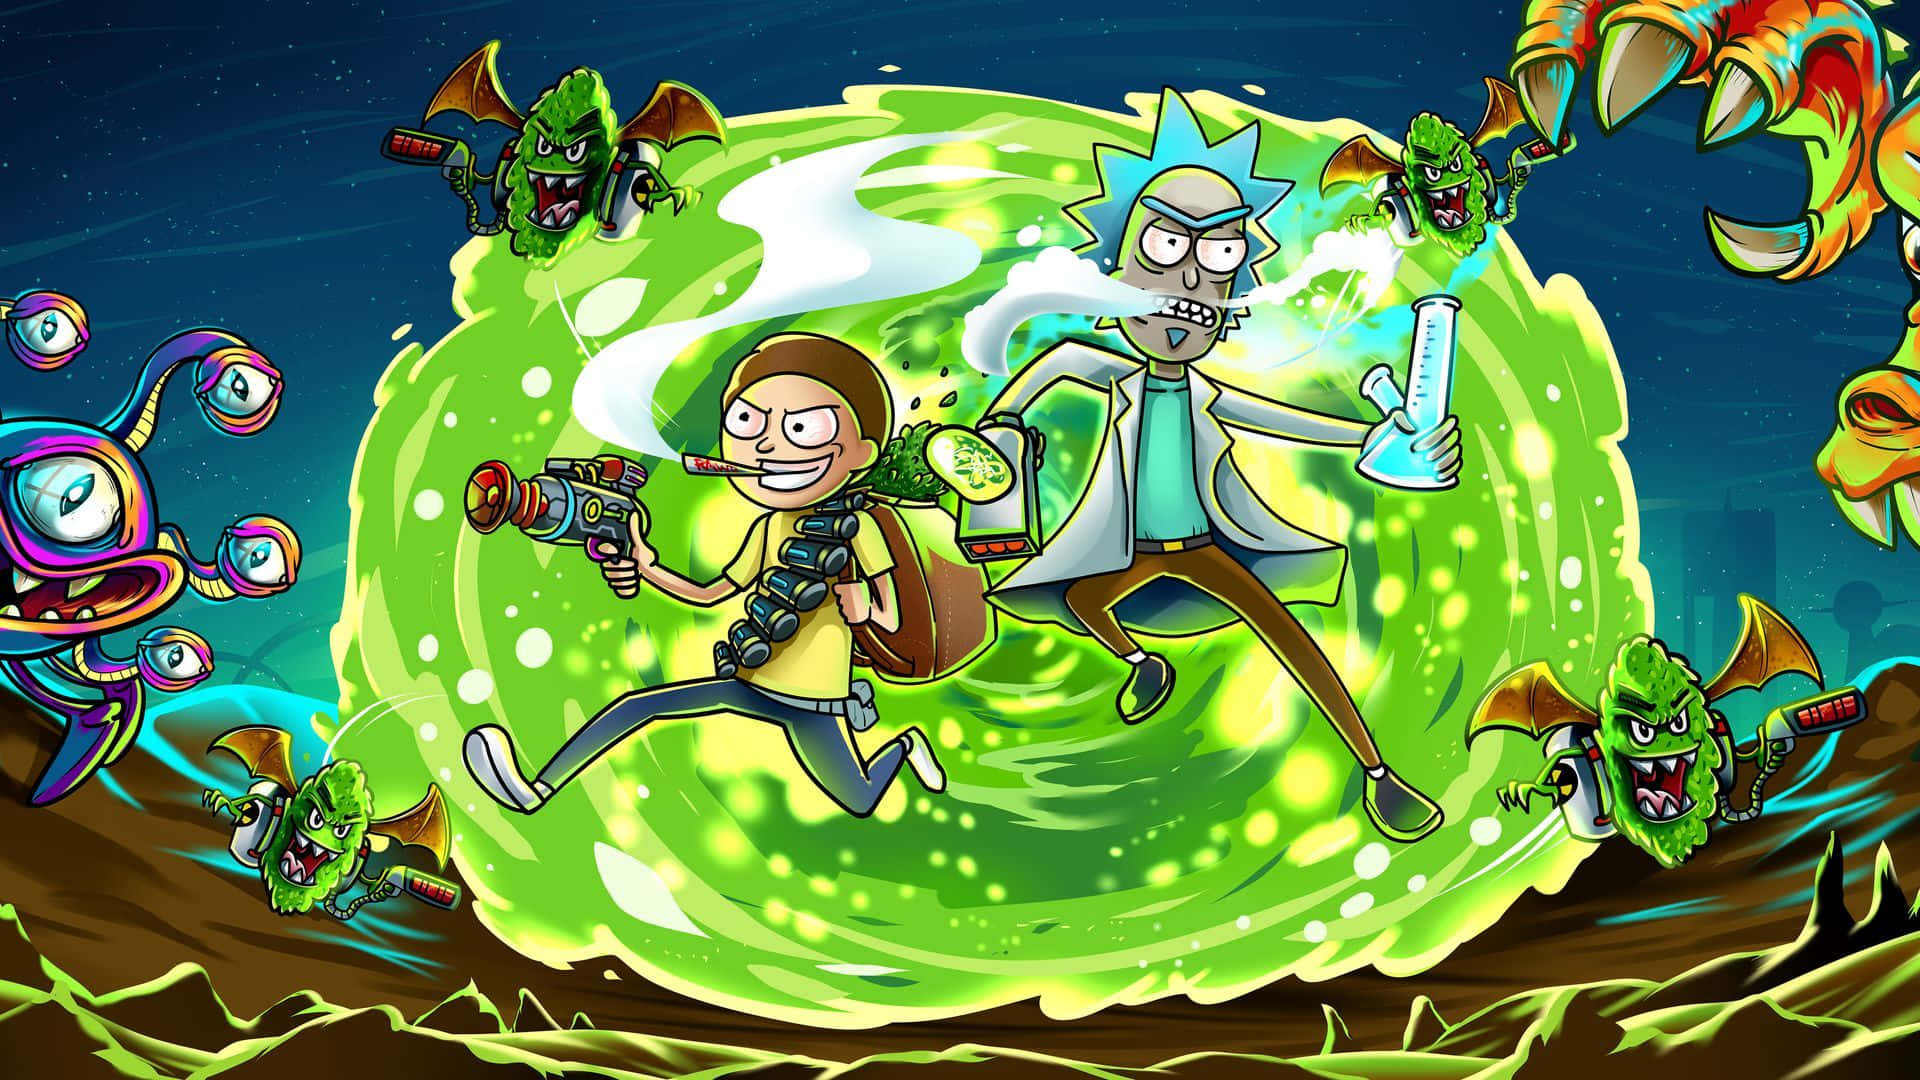 "Rick and Morty adventures will never be the same!" Wallpaper